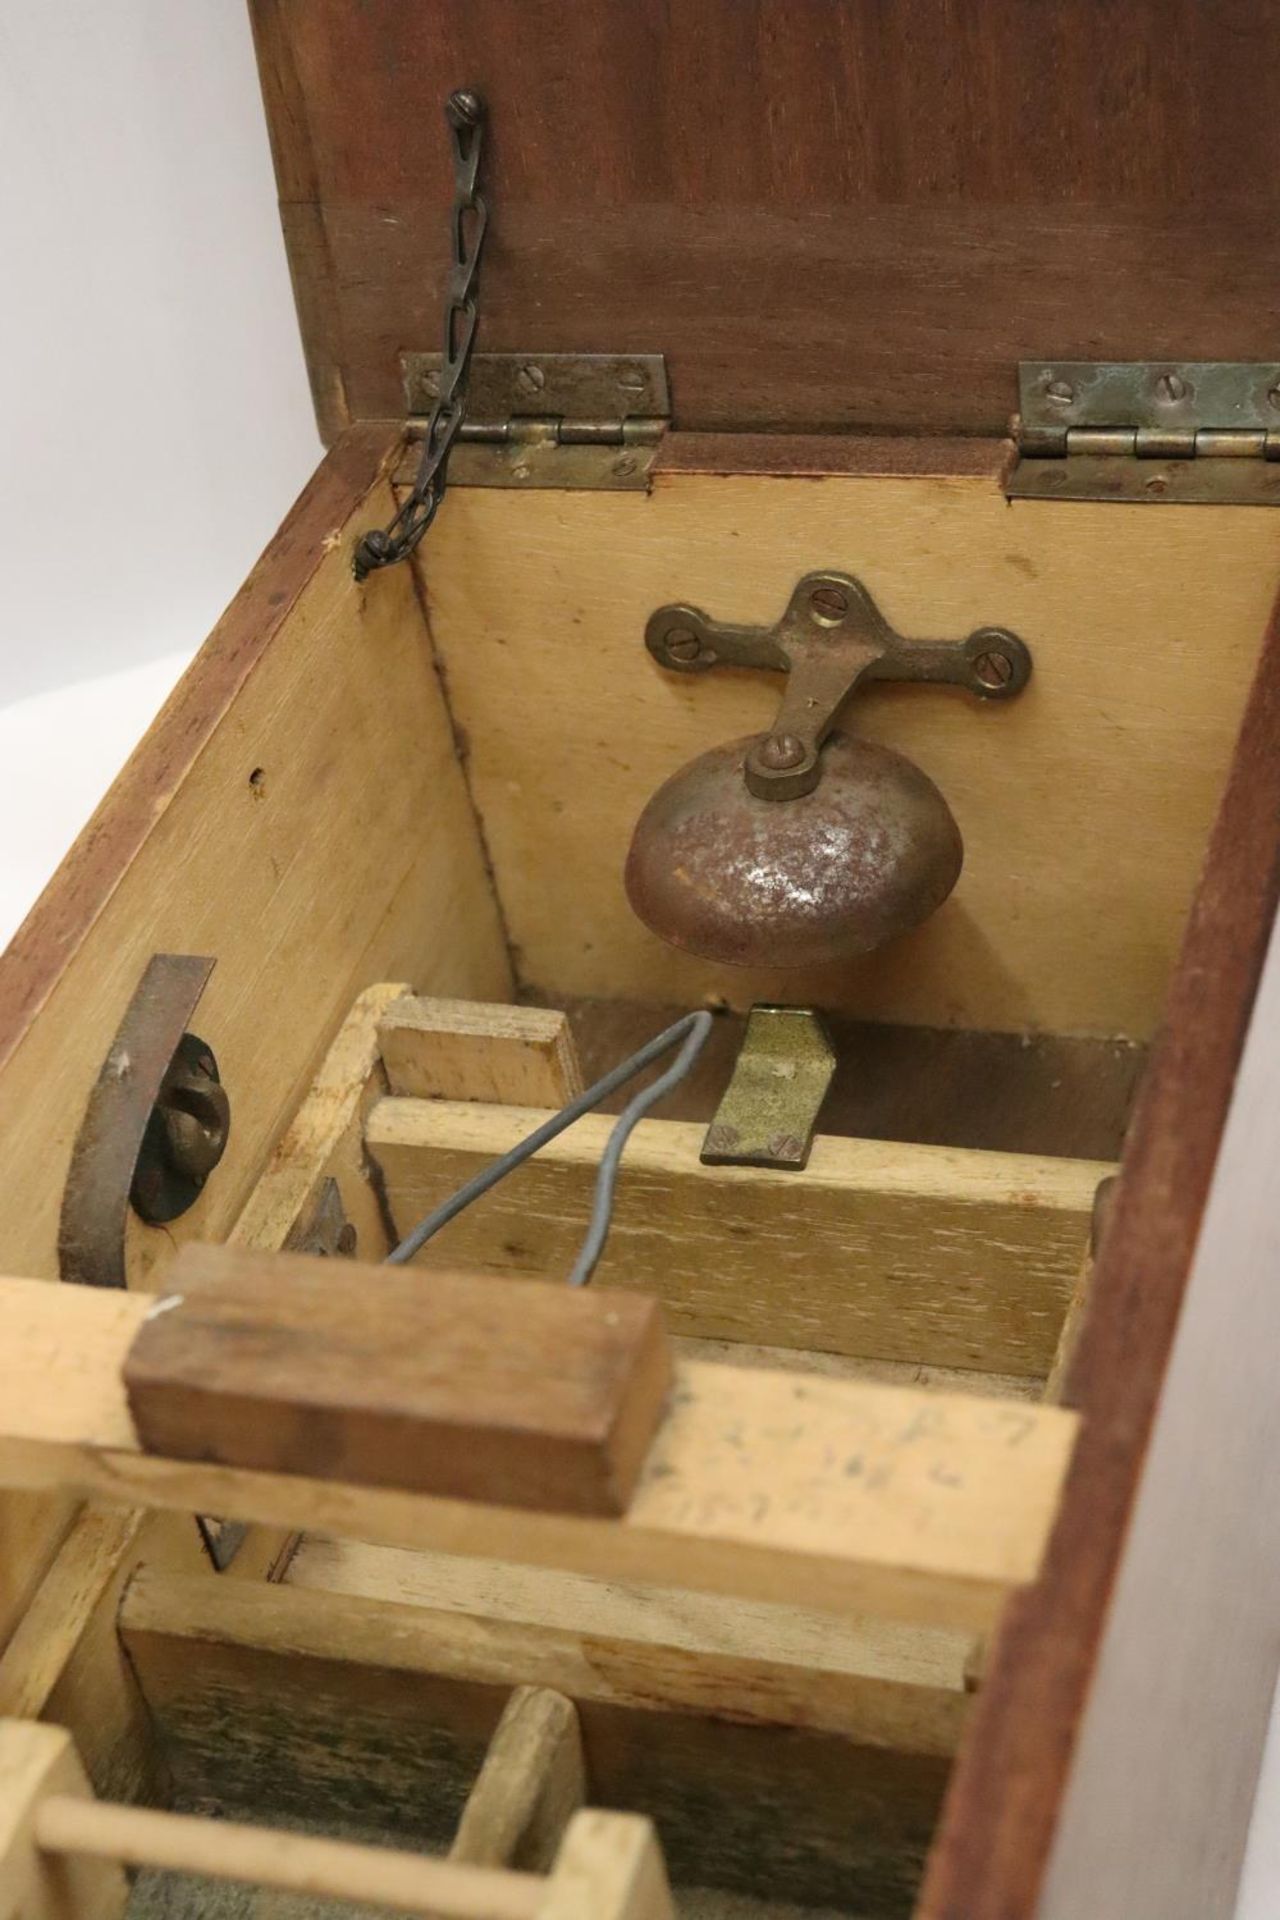 A VINTAGE WOODEN CASH TILL WITH WORKING BELL - Image 4 of 5